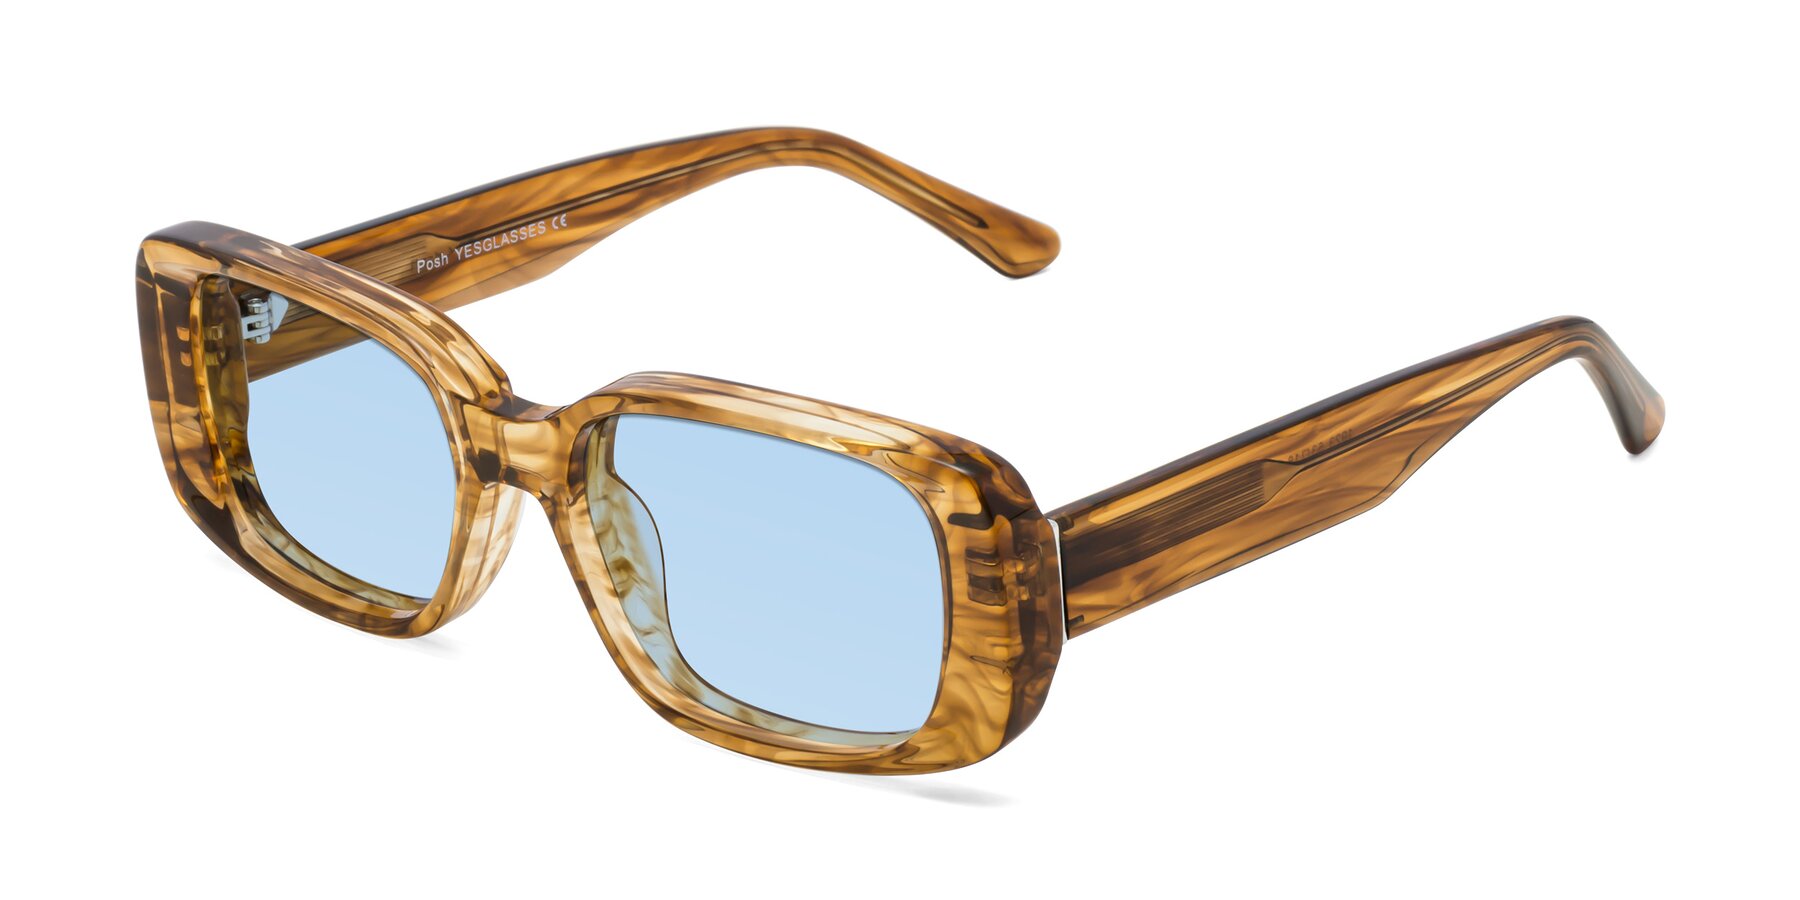 Angle of Posh in Stripe Amber with Light Blue Tinted Lenses